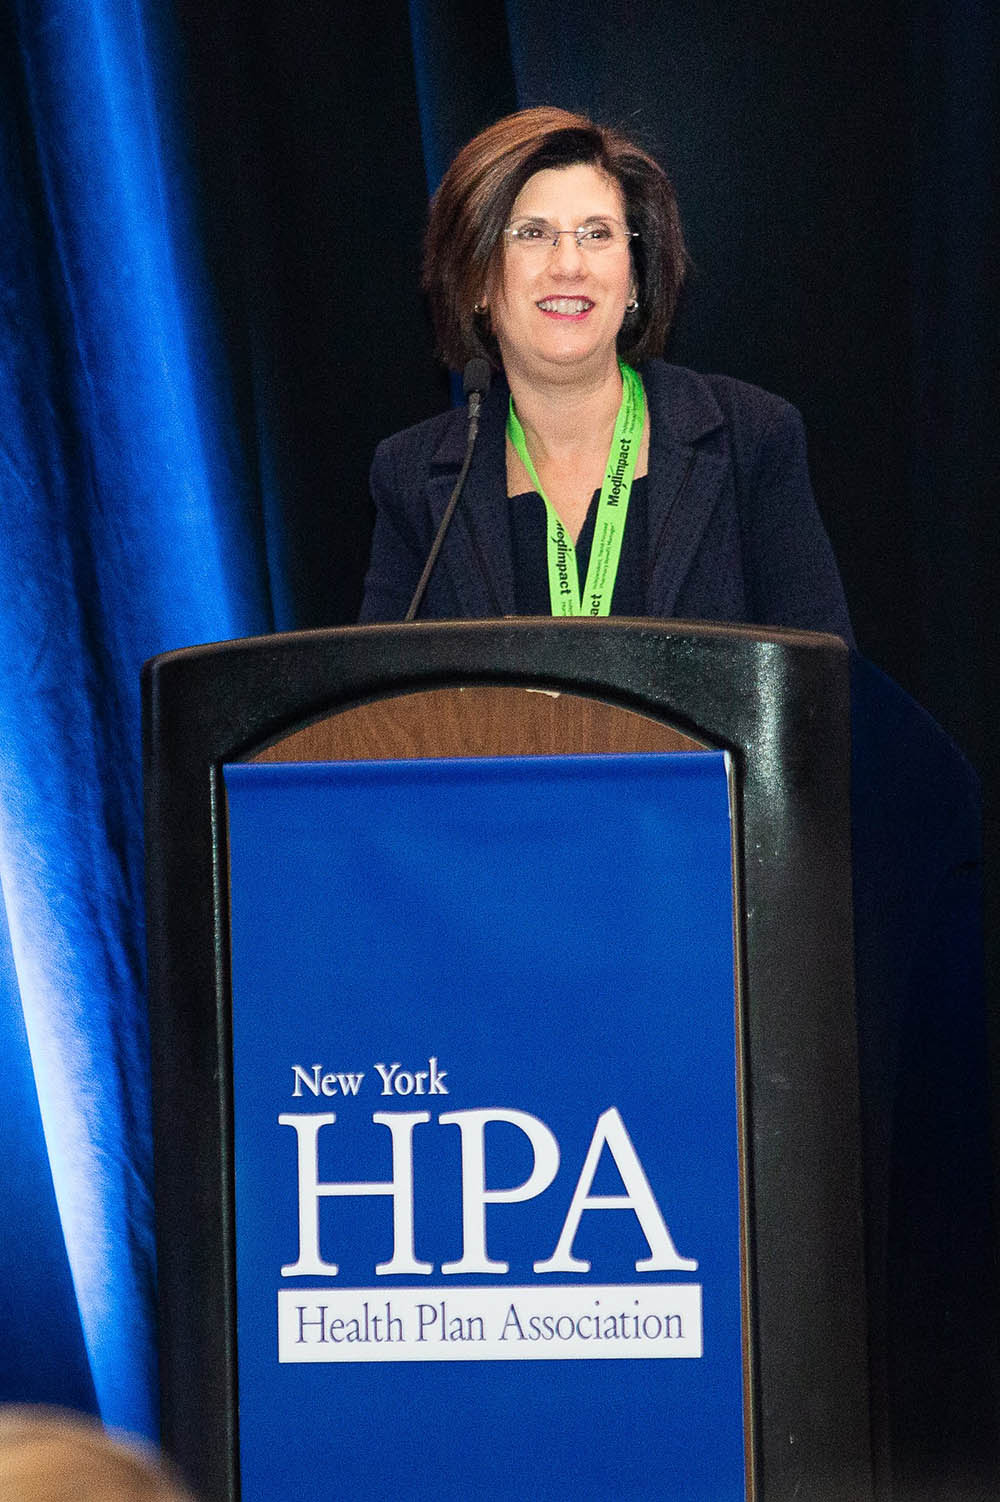 Presenter at 2019 NYHPA Conference